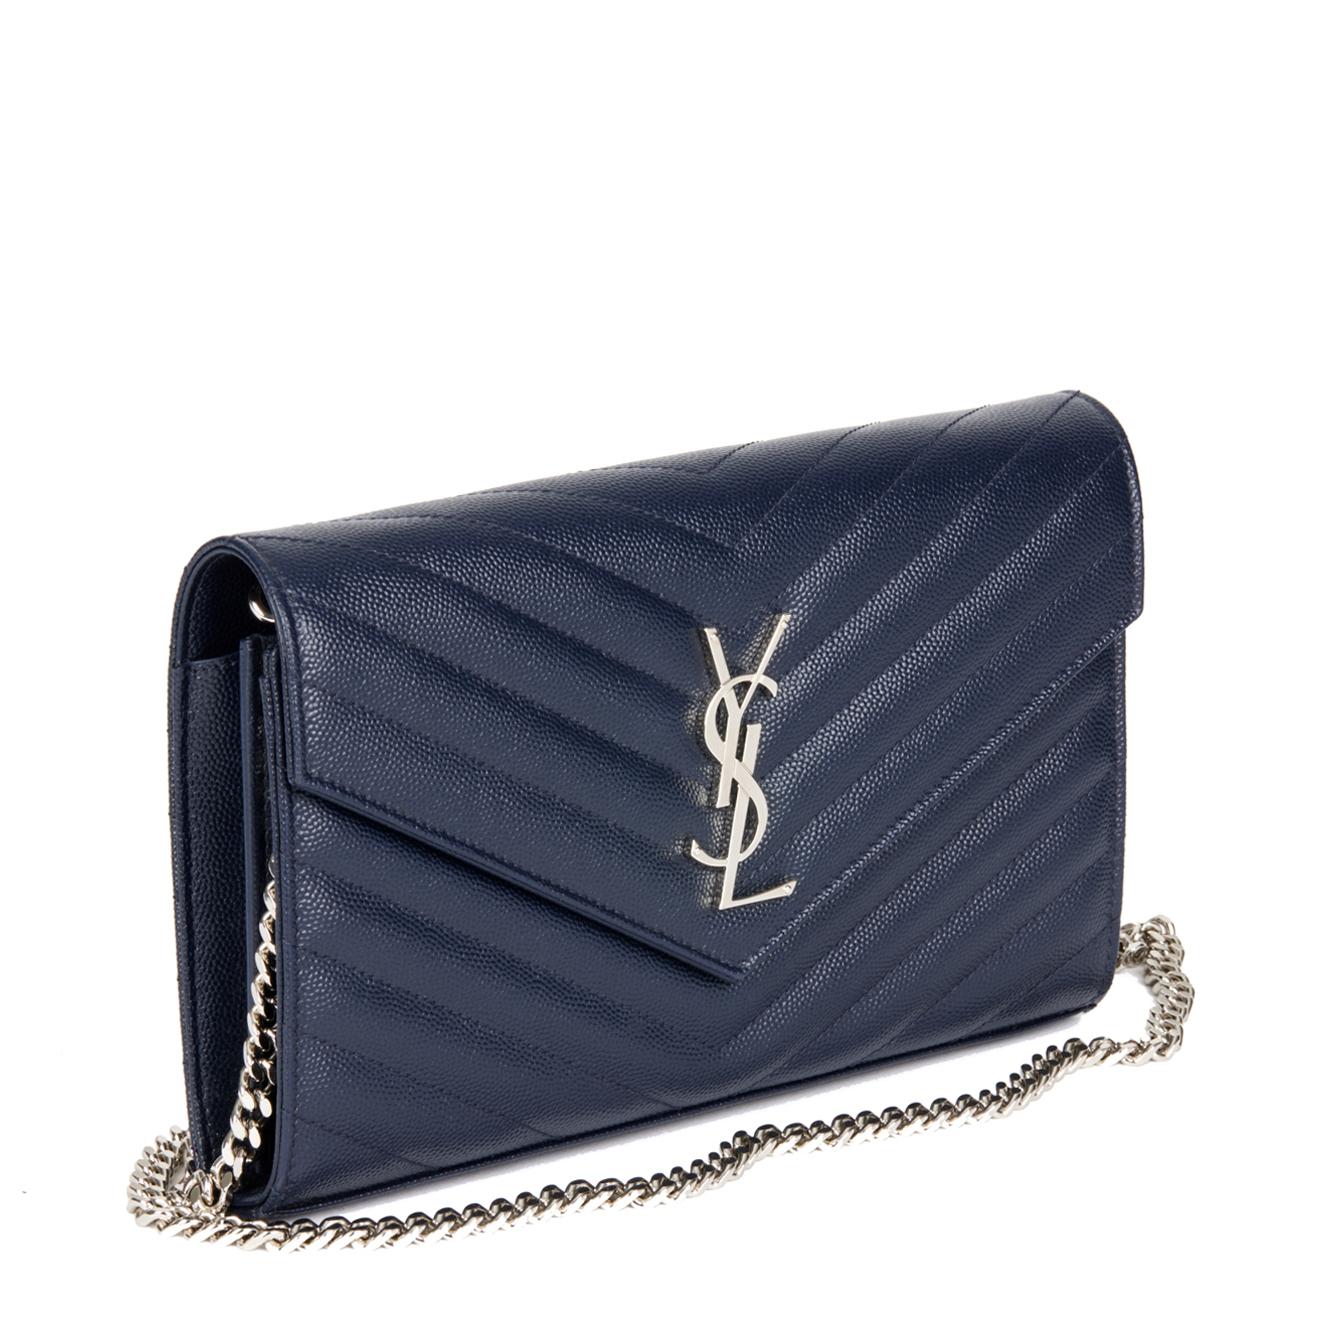 SAINT LAURENT
Navy Chevron Grained Calfskin Leather Envelope Wallet-on-Chain WOC

Xupes Reference: CB594
Serial Number: GBL377828-0617
Age (Circa): 2020
Accompanied By: Saint Laurent Dust Bag
Authenticity Details: Date Stamp (Made in Italy)
Gender: